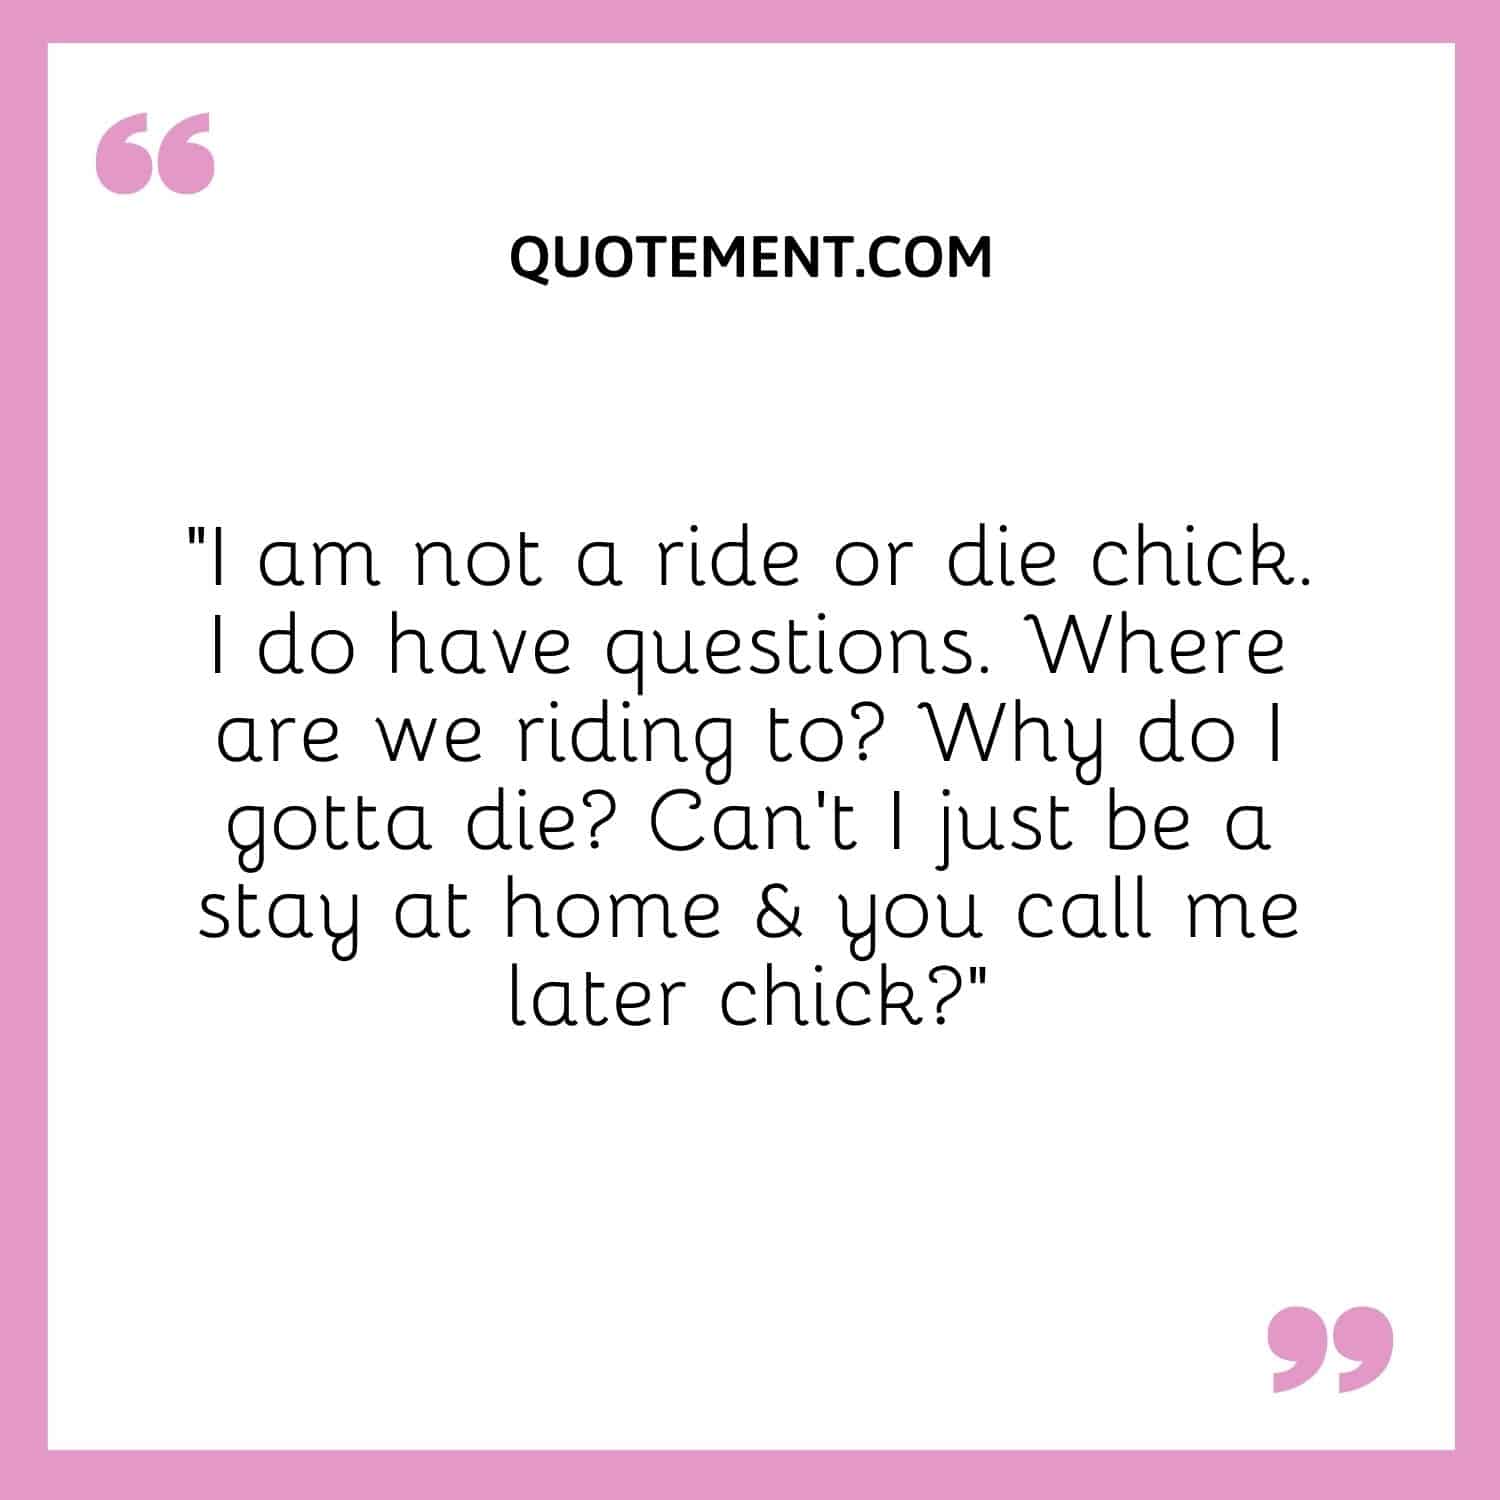 I am not a ride or die chick. I do have questions. Where are we riding to Why do I gotta die Can't I just be a stay at home & you call me later chick